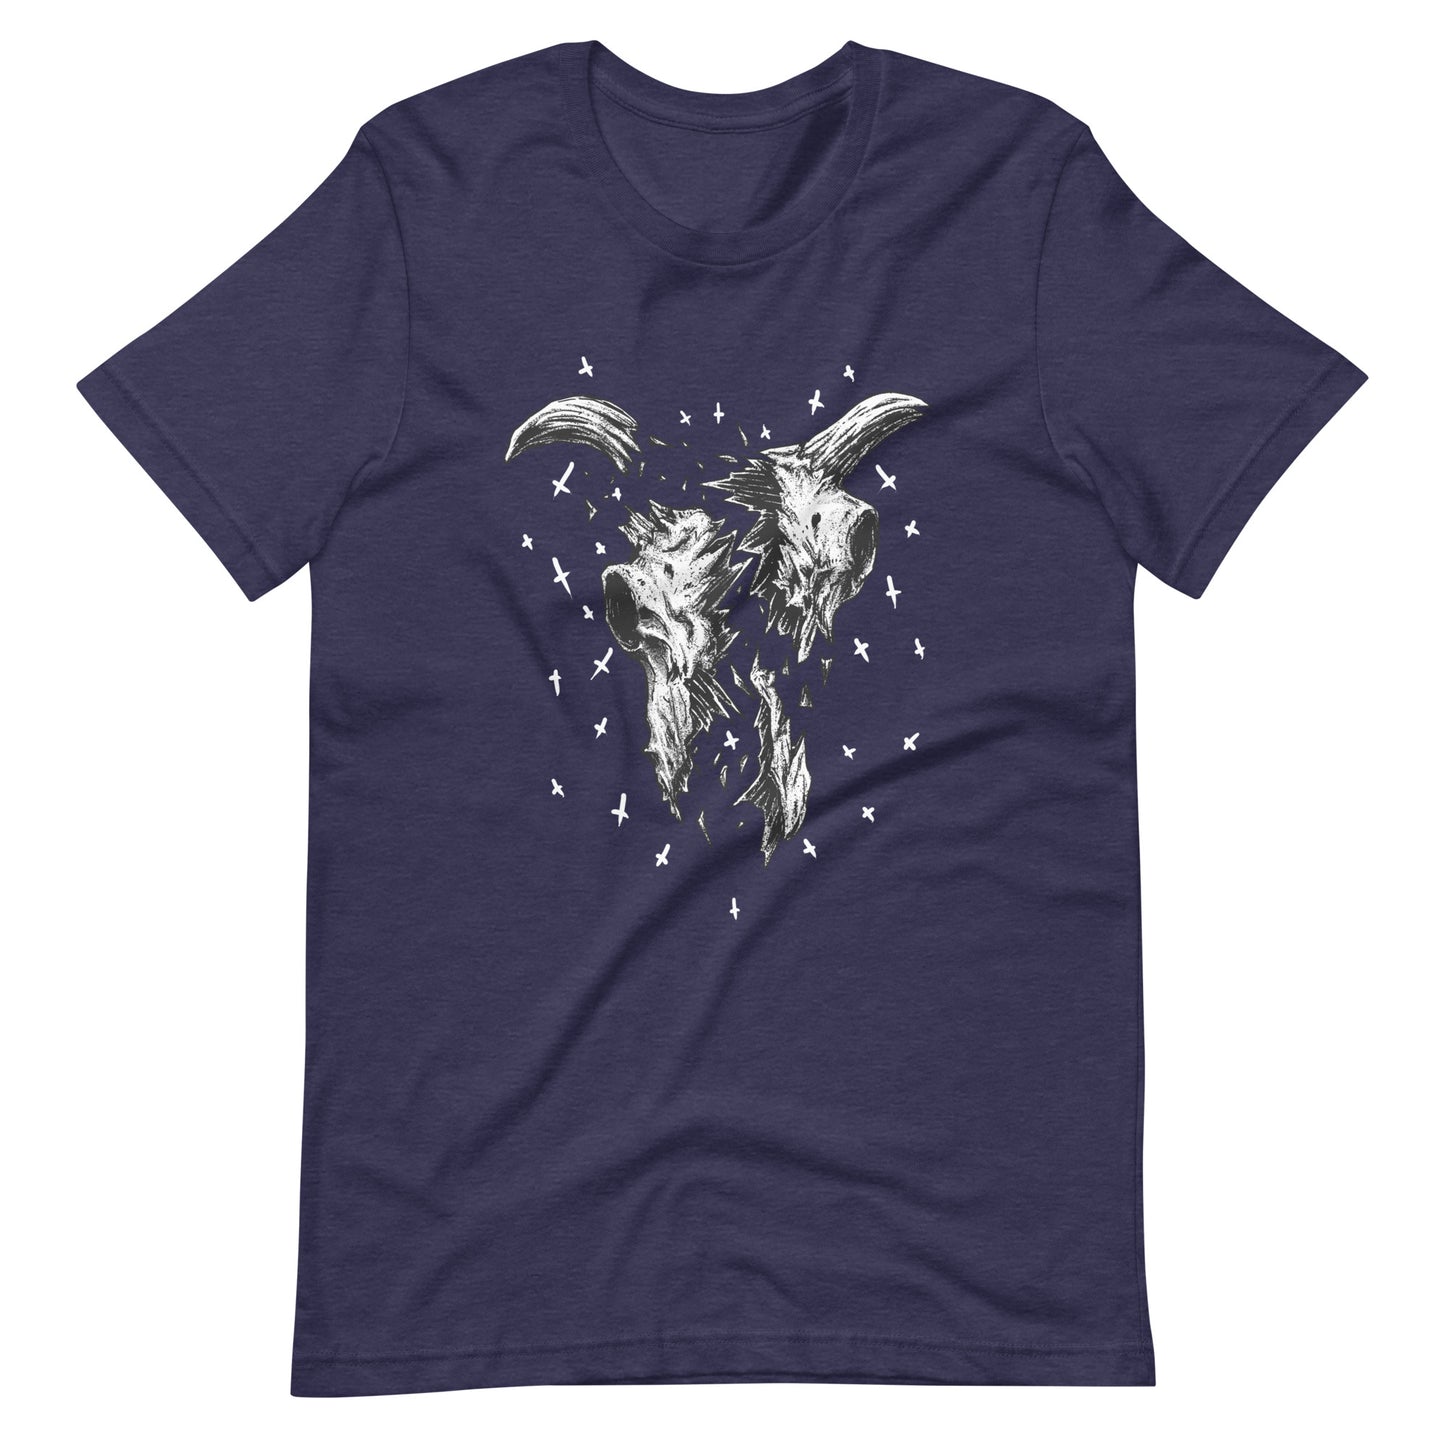 Crushed - Men's t-shirt - Heather Midnight Navy Front